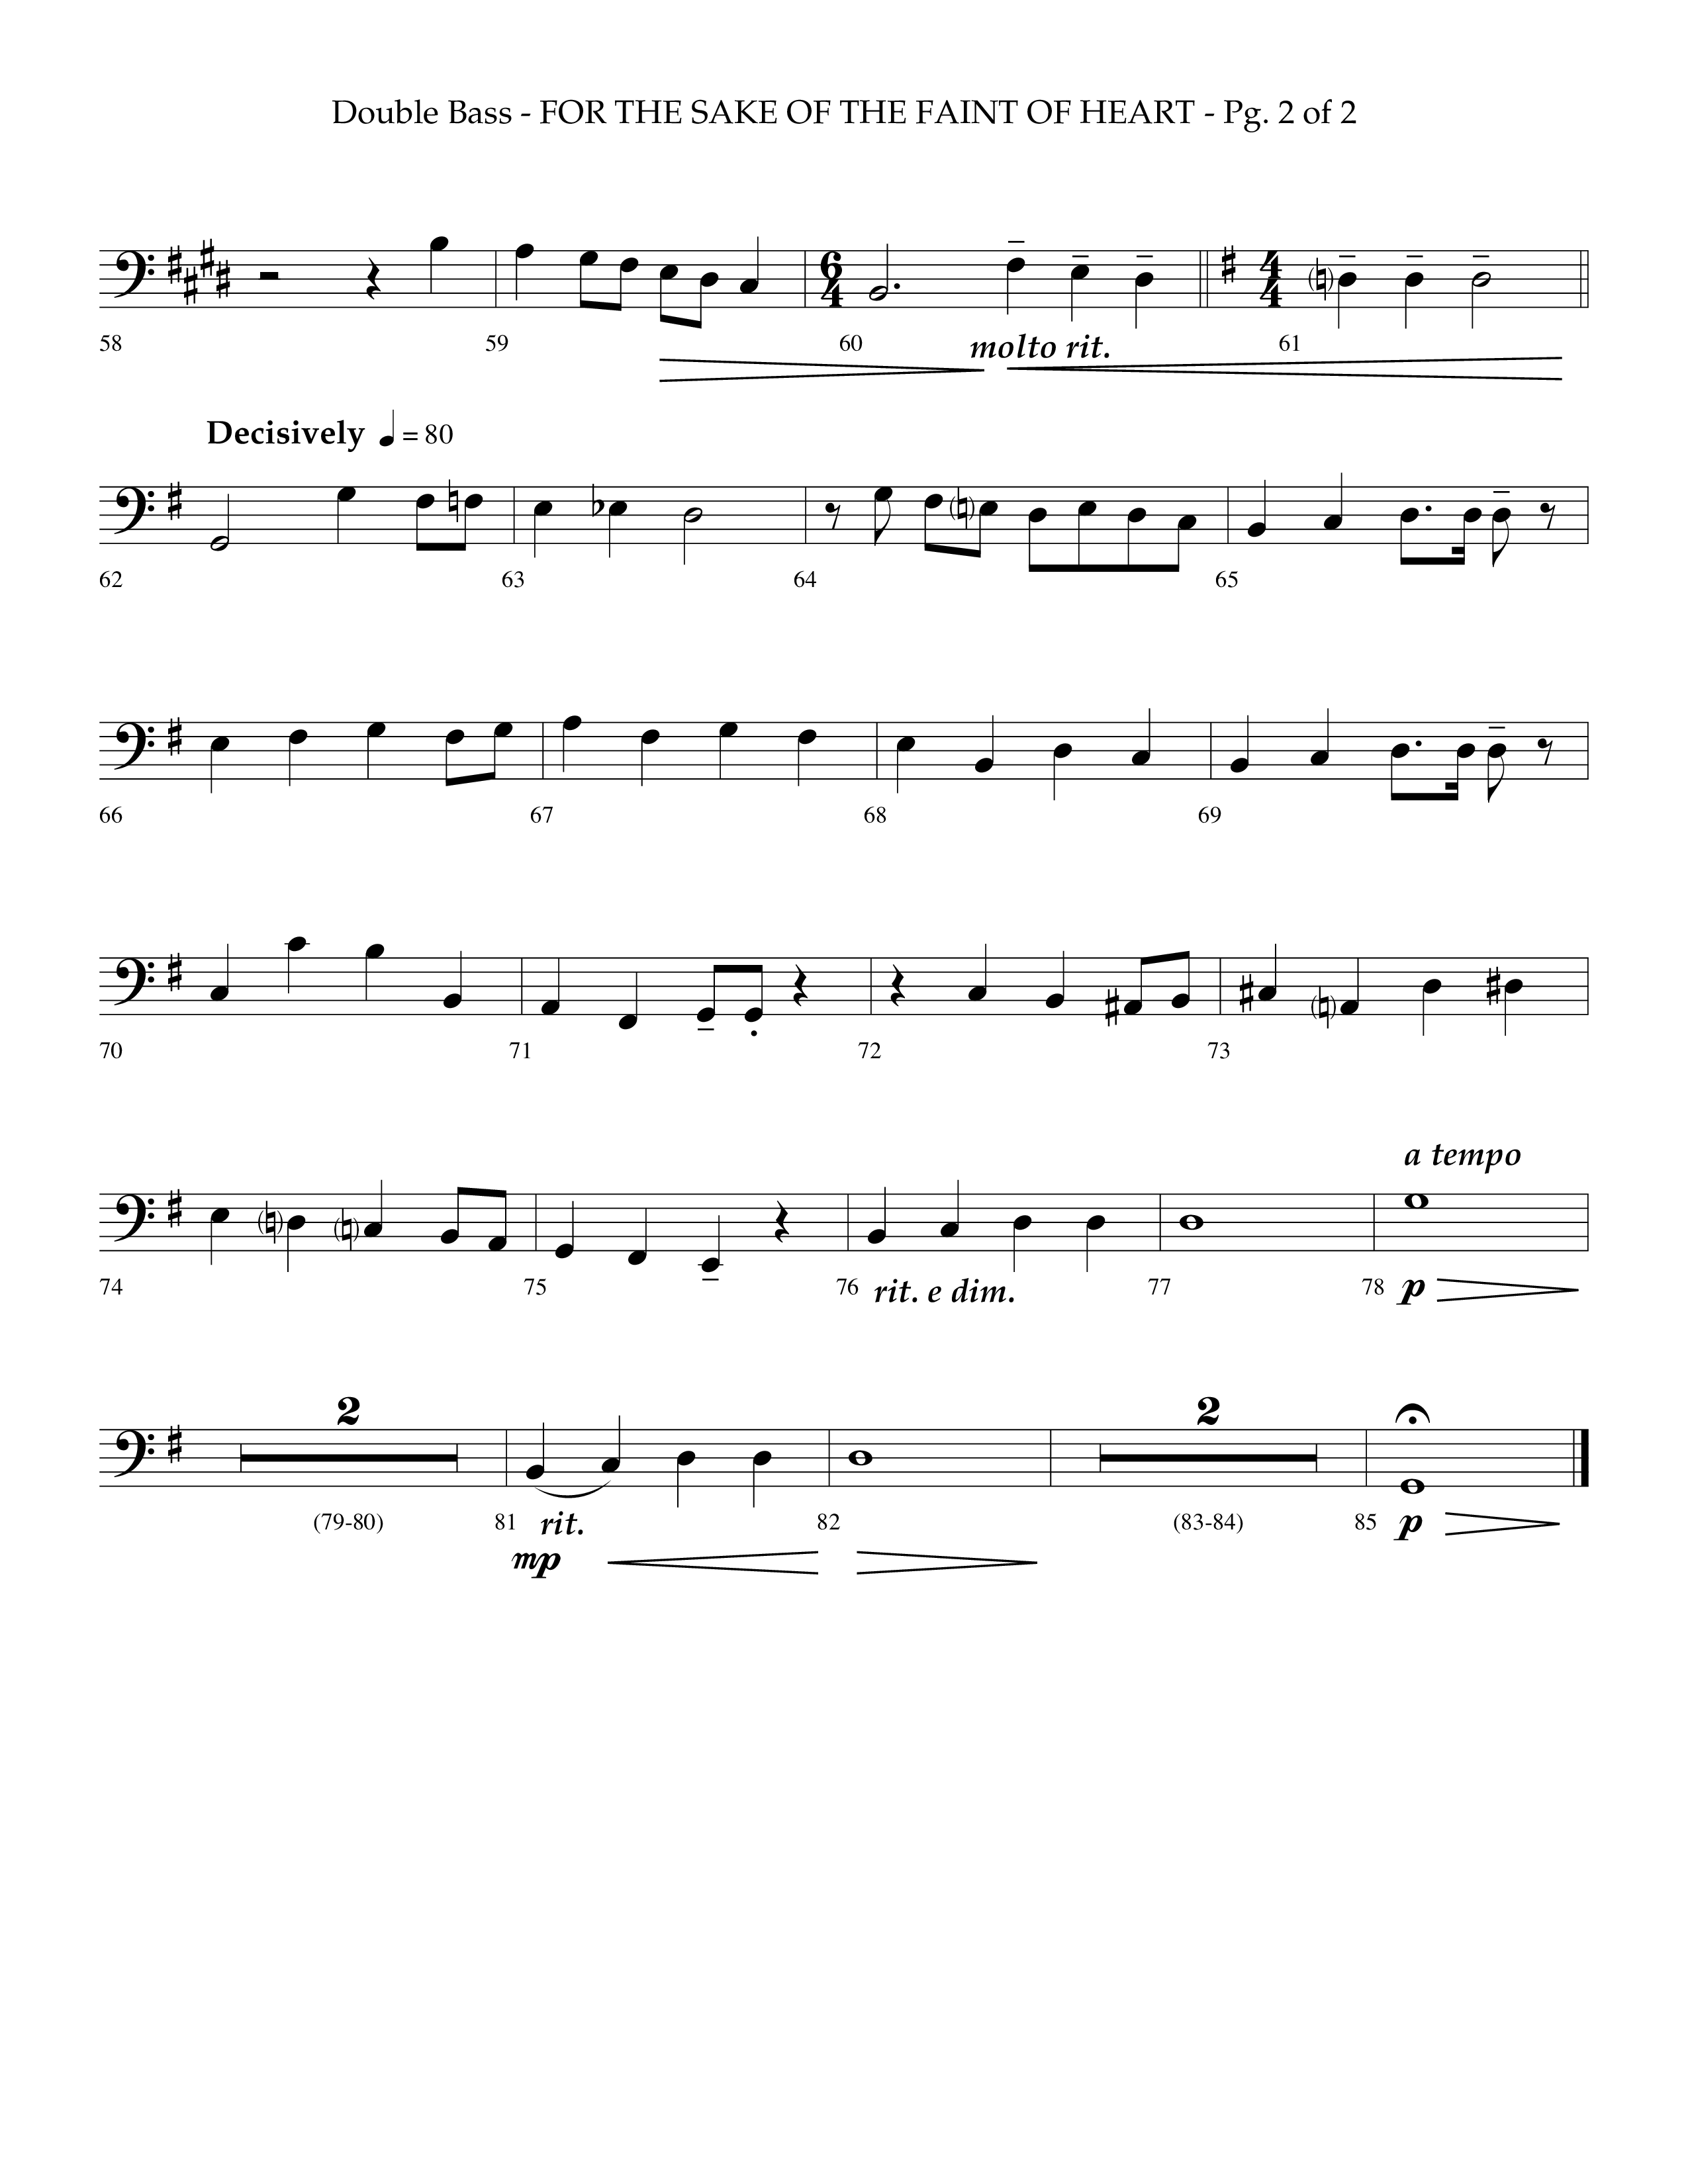 For The Sake Of The Faint Of Heart (Choral Anthem SATB) Double Bass (Lifeway Choral / Arr. Phillip Keveren)